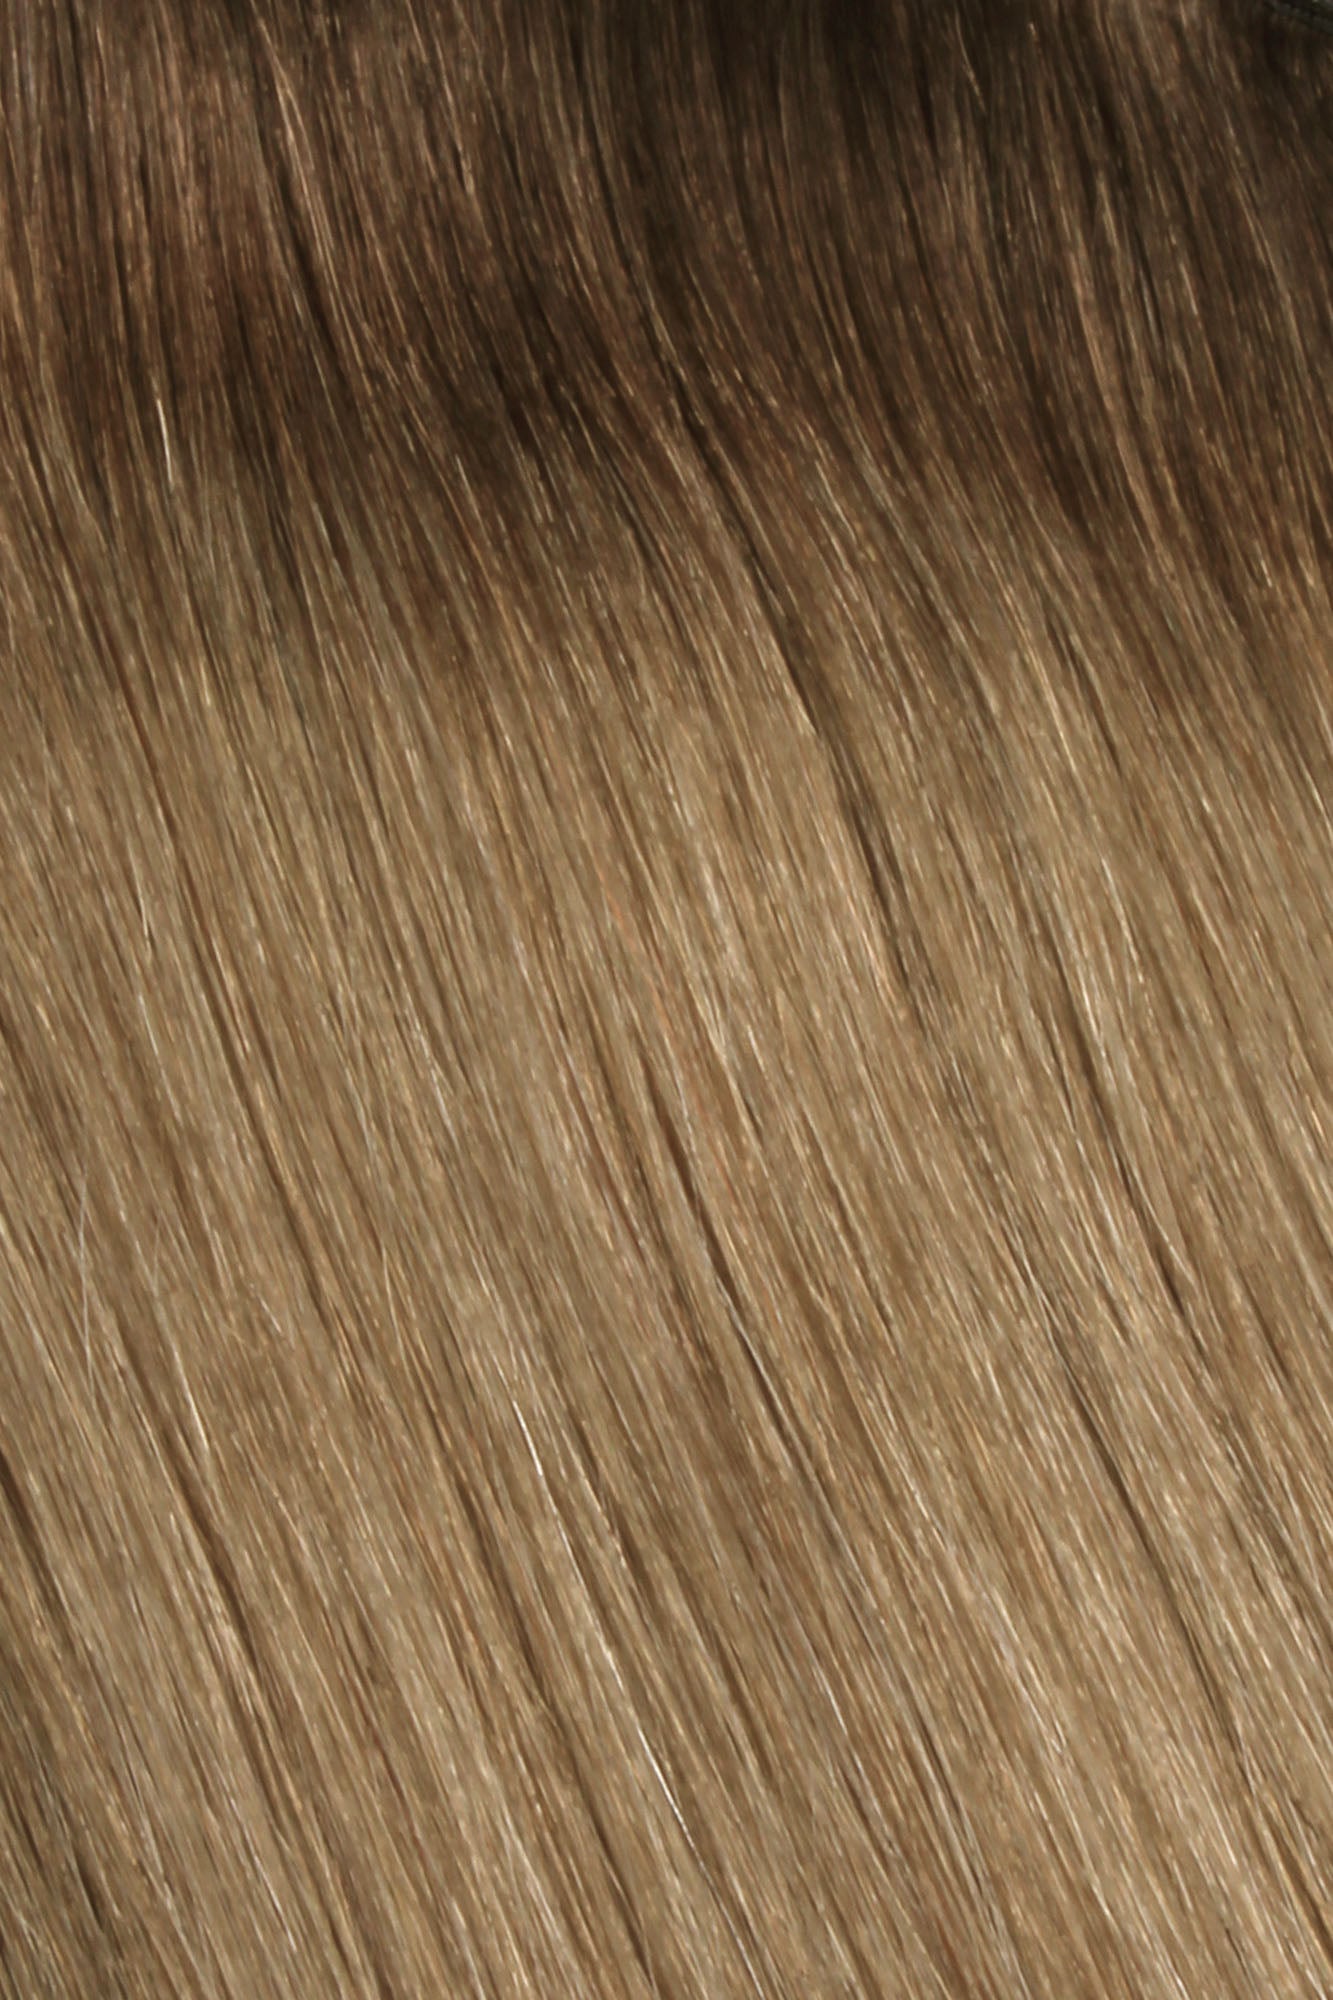 SEAMLESS® Flat Weft 20 Inches - SWAY Hair Extensions Rooted-Champagne-Chestnut-R5-8-22 Natural SEAMLESS® Flat Weft 20 Inches extensions. Thin, flexible, and discreet. 100% Double Drawn Remy Human Hair. Versatile and reusable